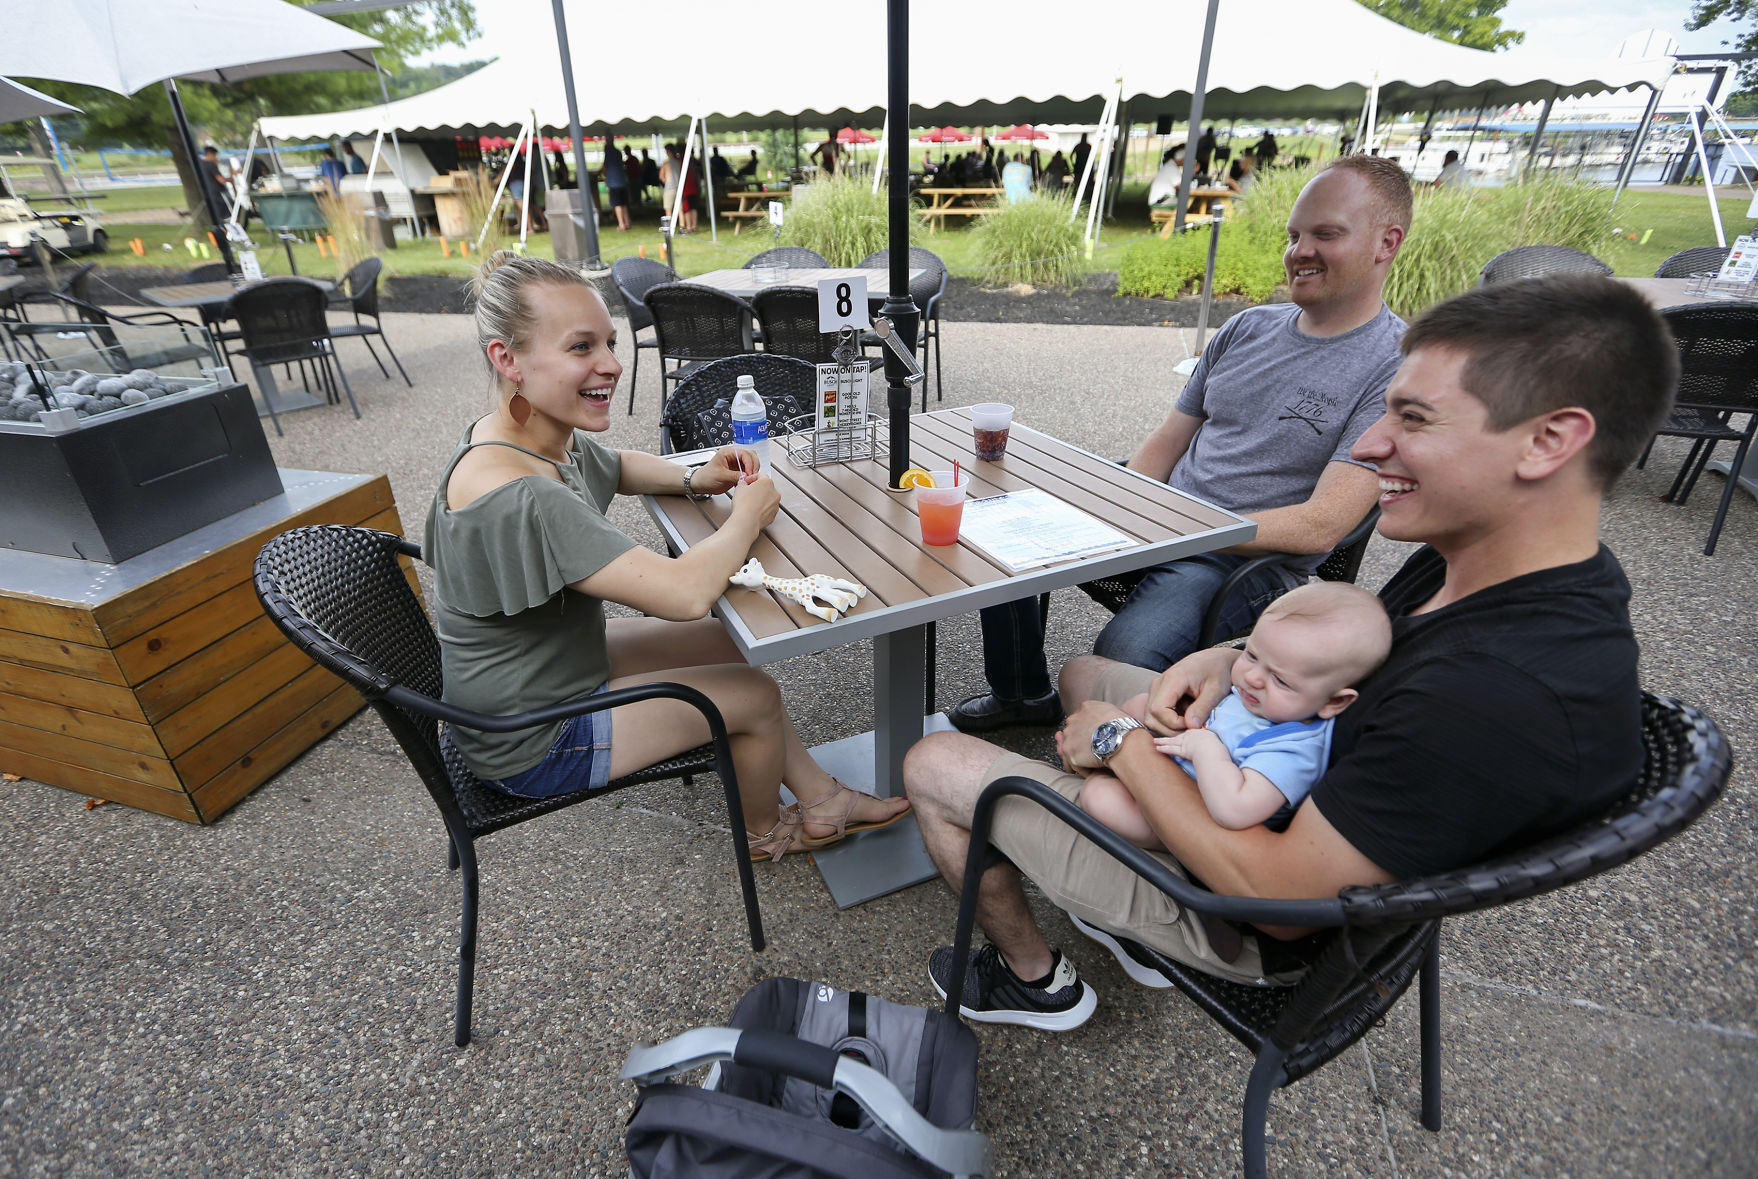 Ashley Gerlach (from left), Anthony Johnson, Carter Davis and Steve Davis dine outside at Frentress Lake Bar & Grill in East Dubuque, Ill., on Saturday. PHOTO CREDIT: NICKI KOHL